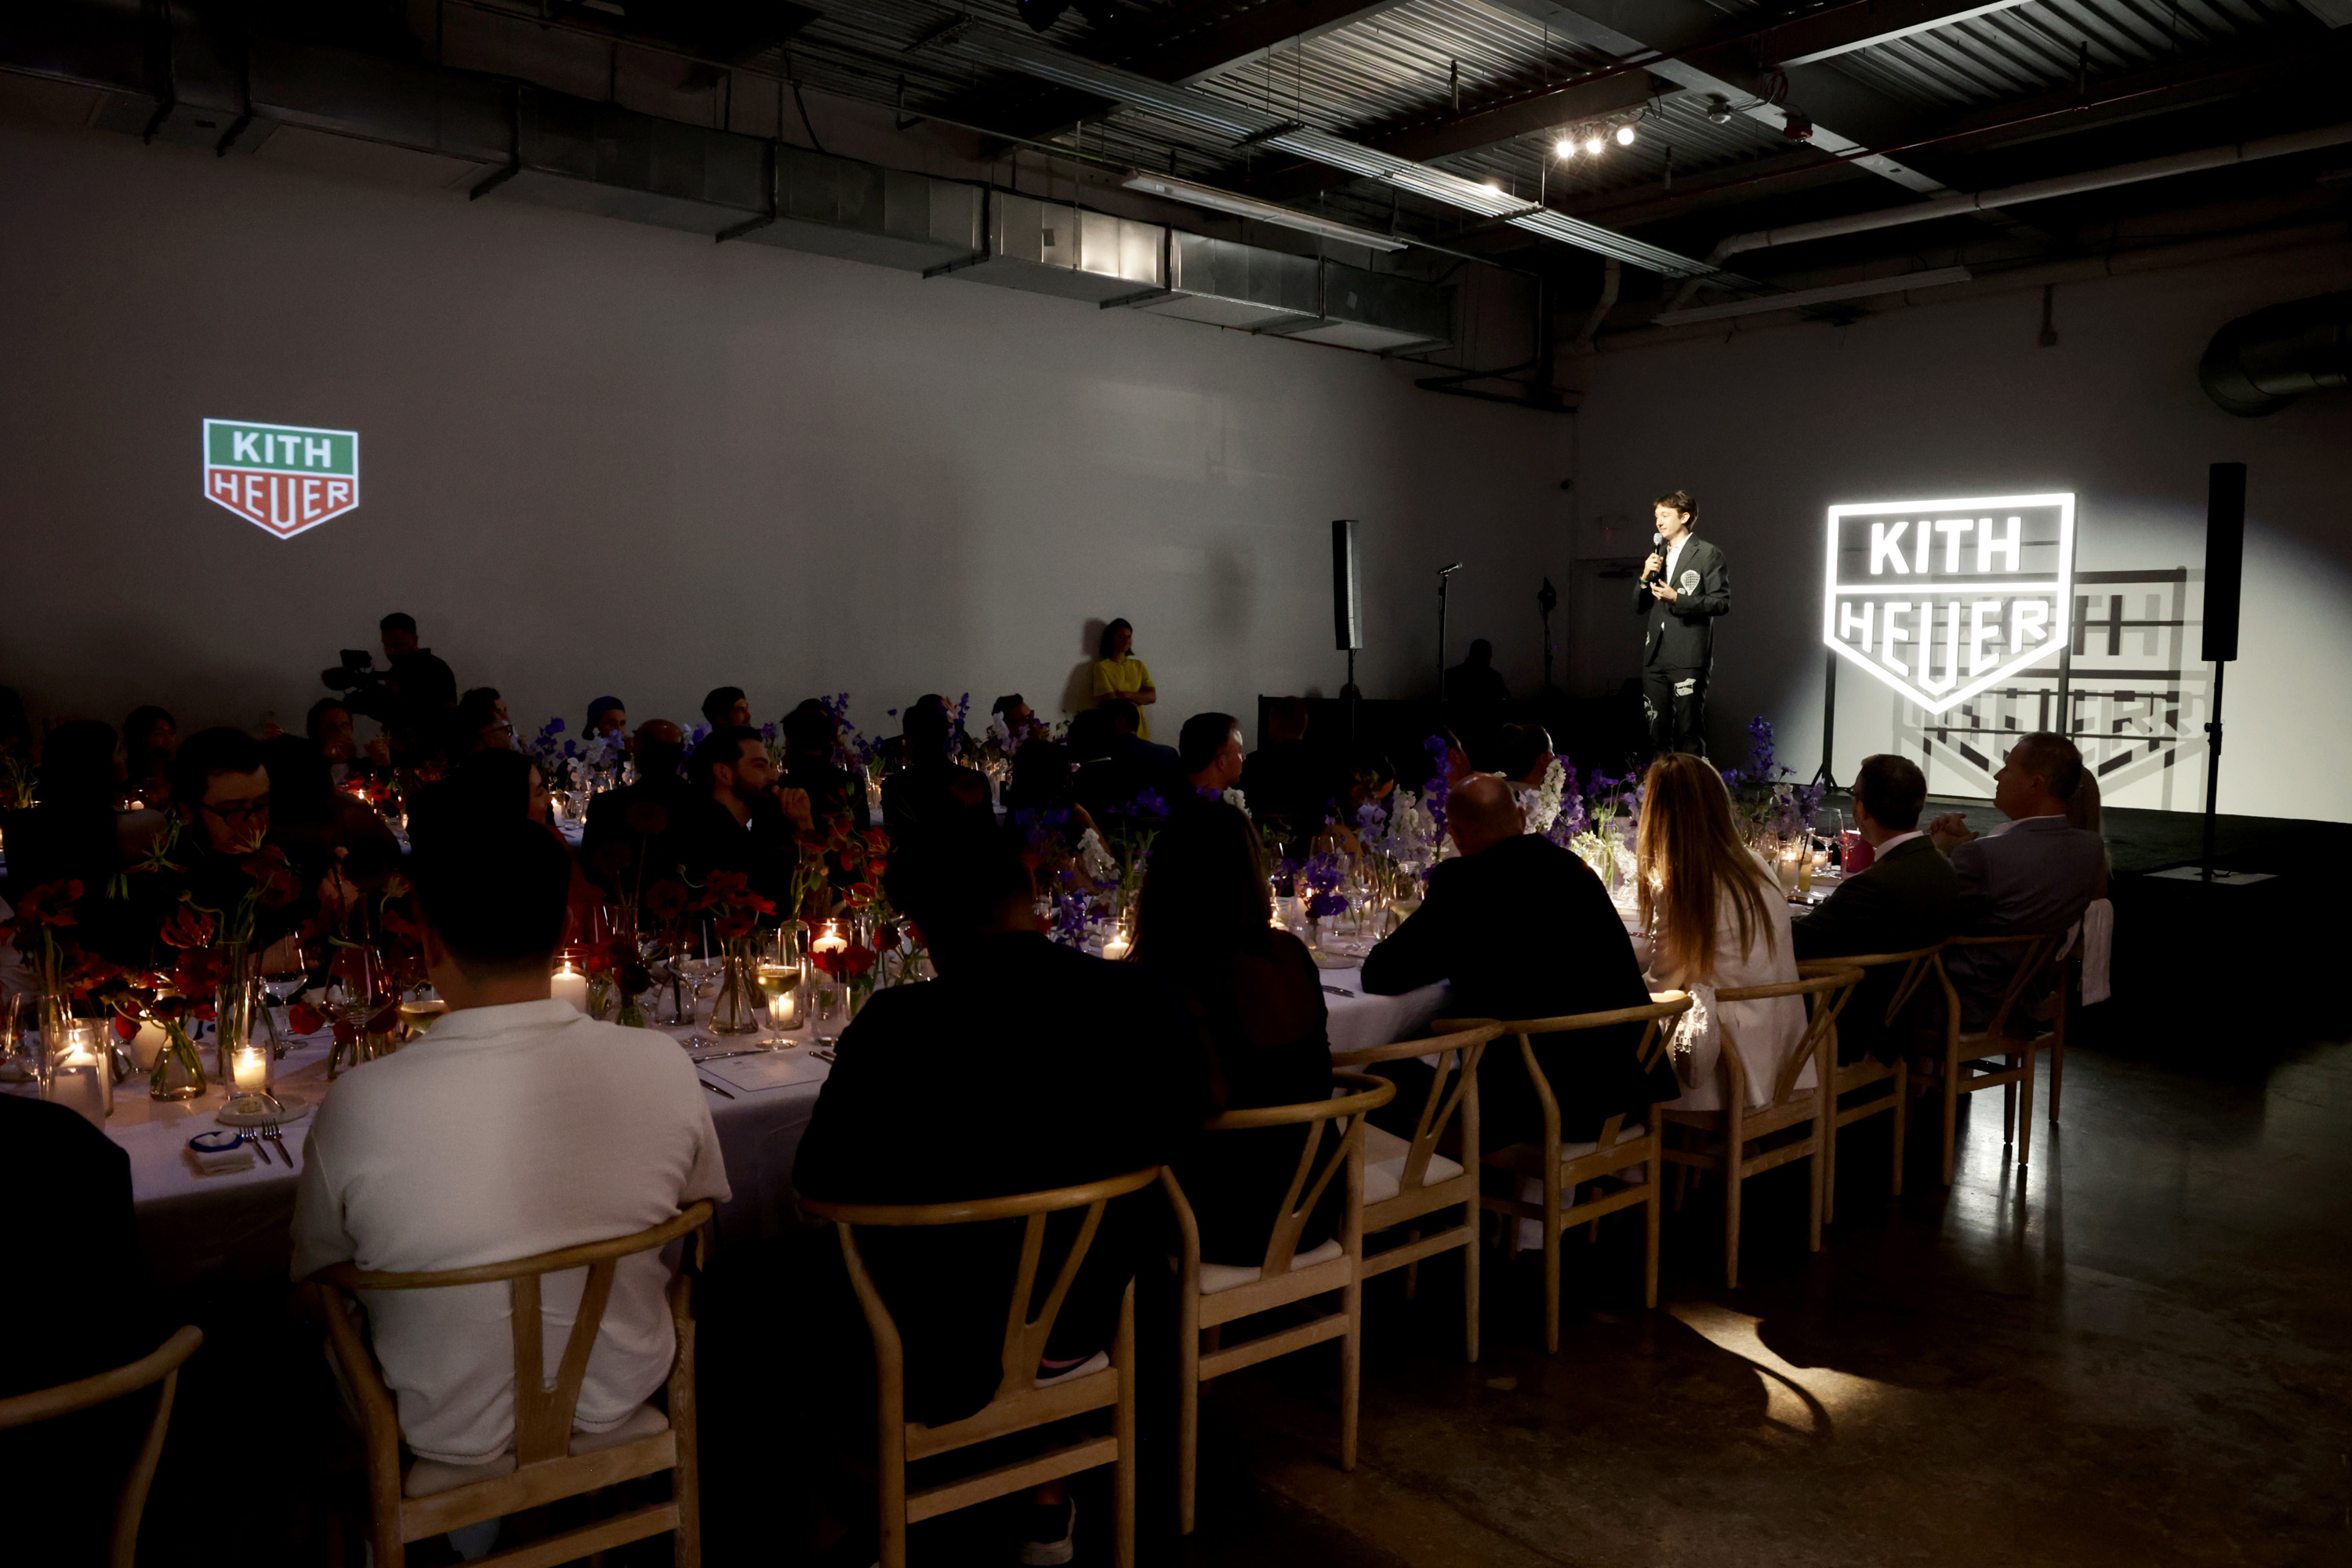 Tag Heuer x Kith Dinner at F1 Miami